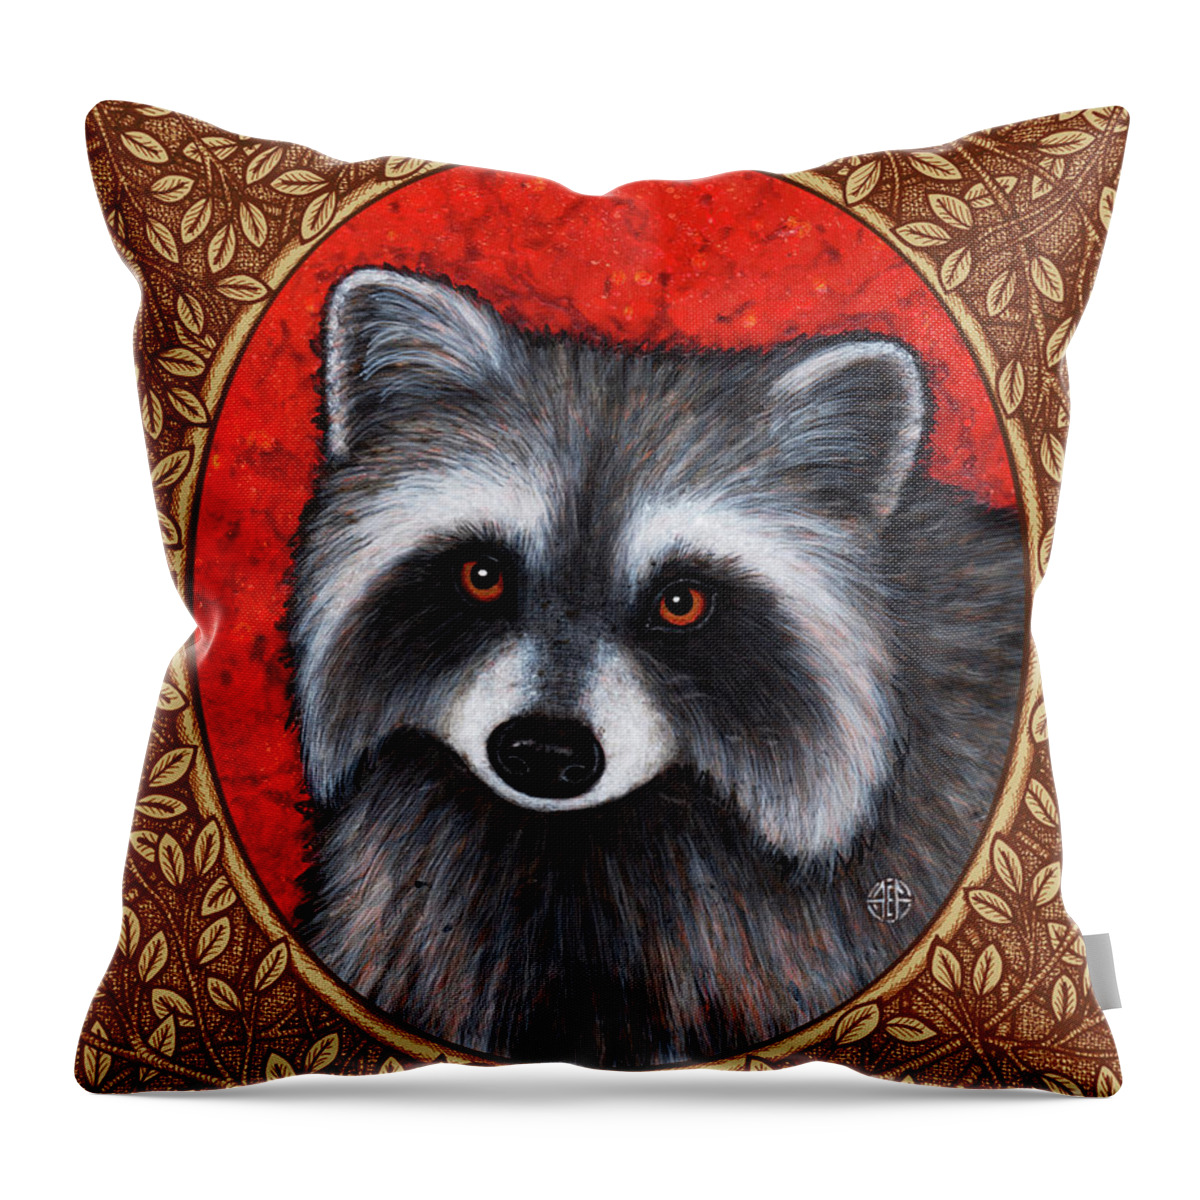 Animal Portrait Throw Pillow featuring the painting Raccoon Portrait - Brown Border by Amy E Fraser